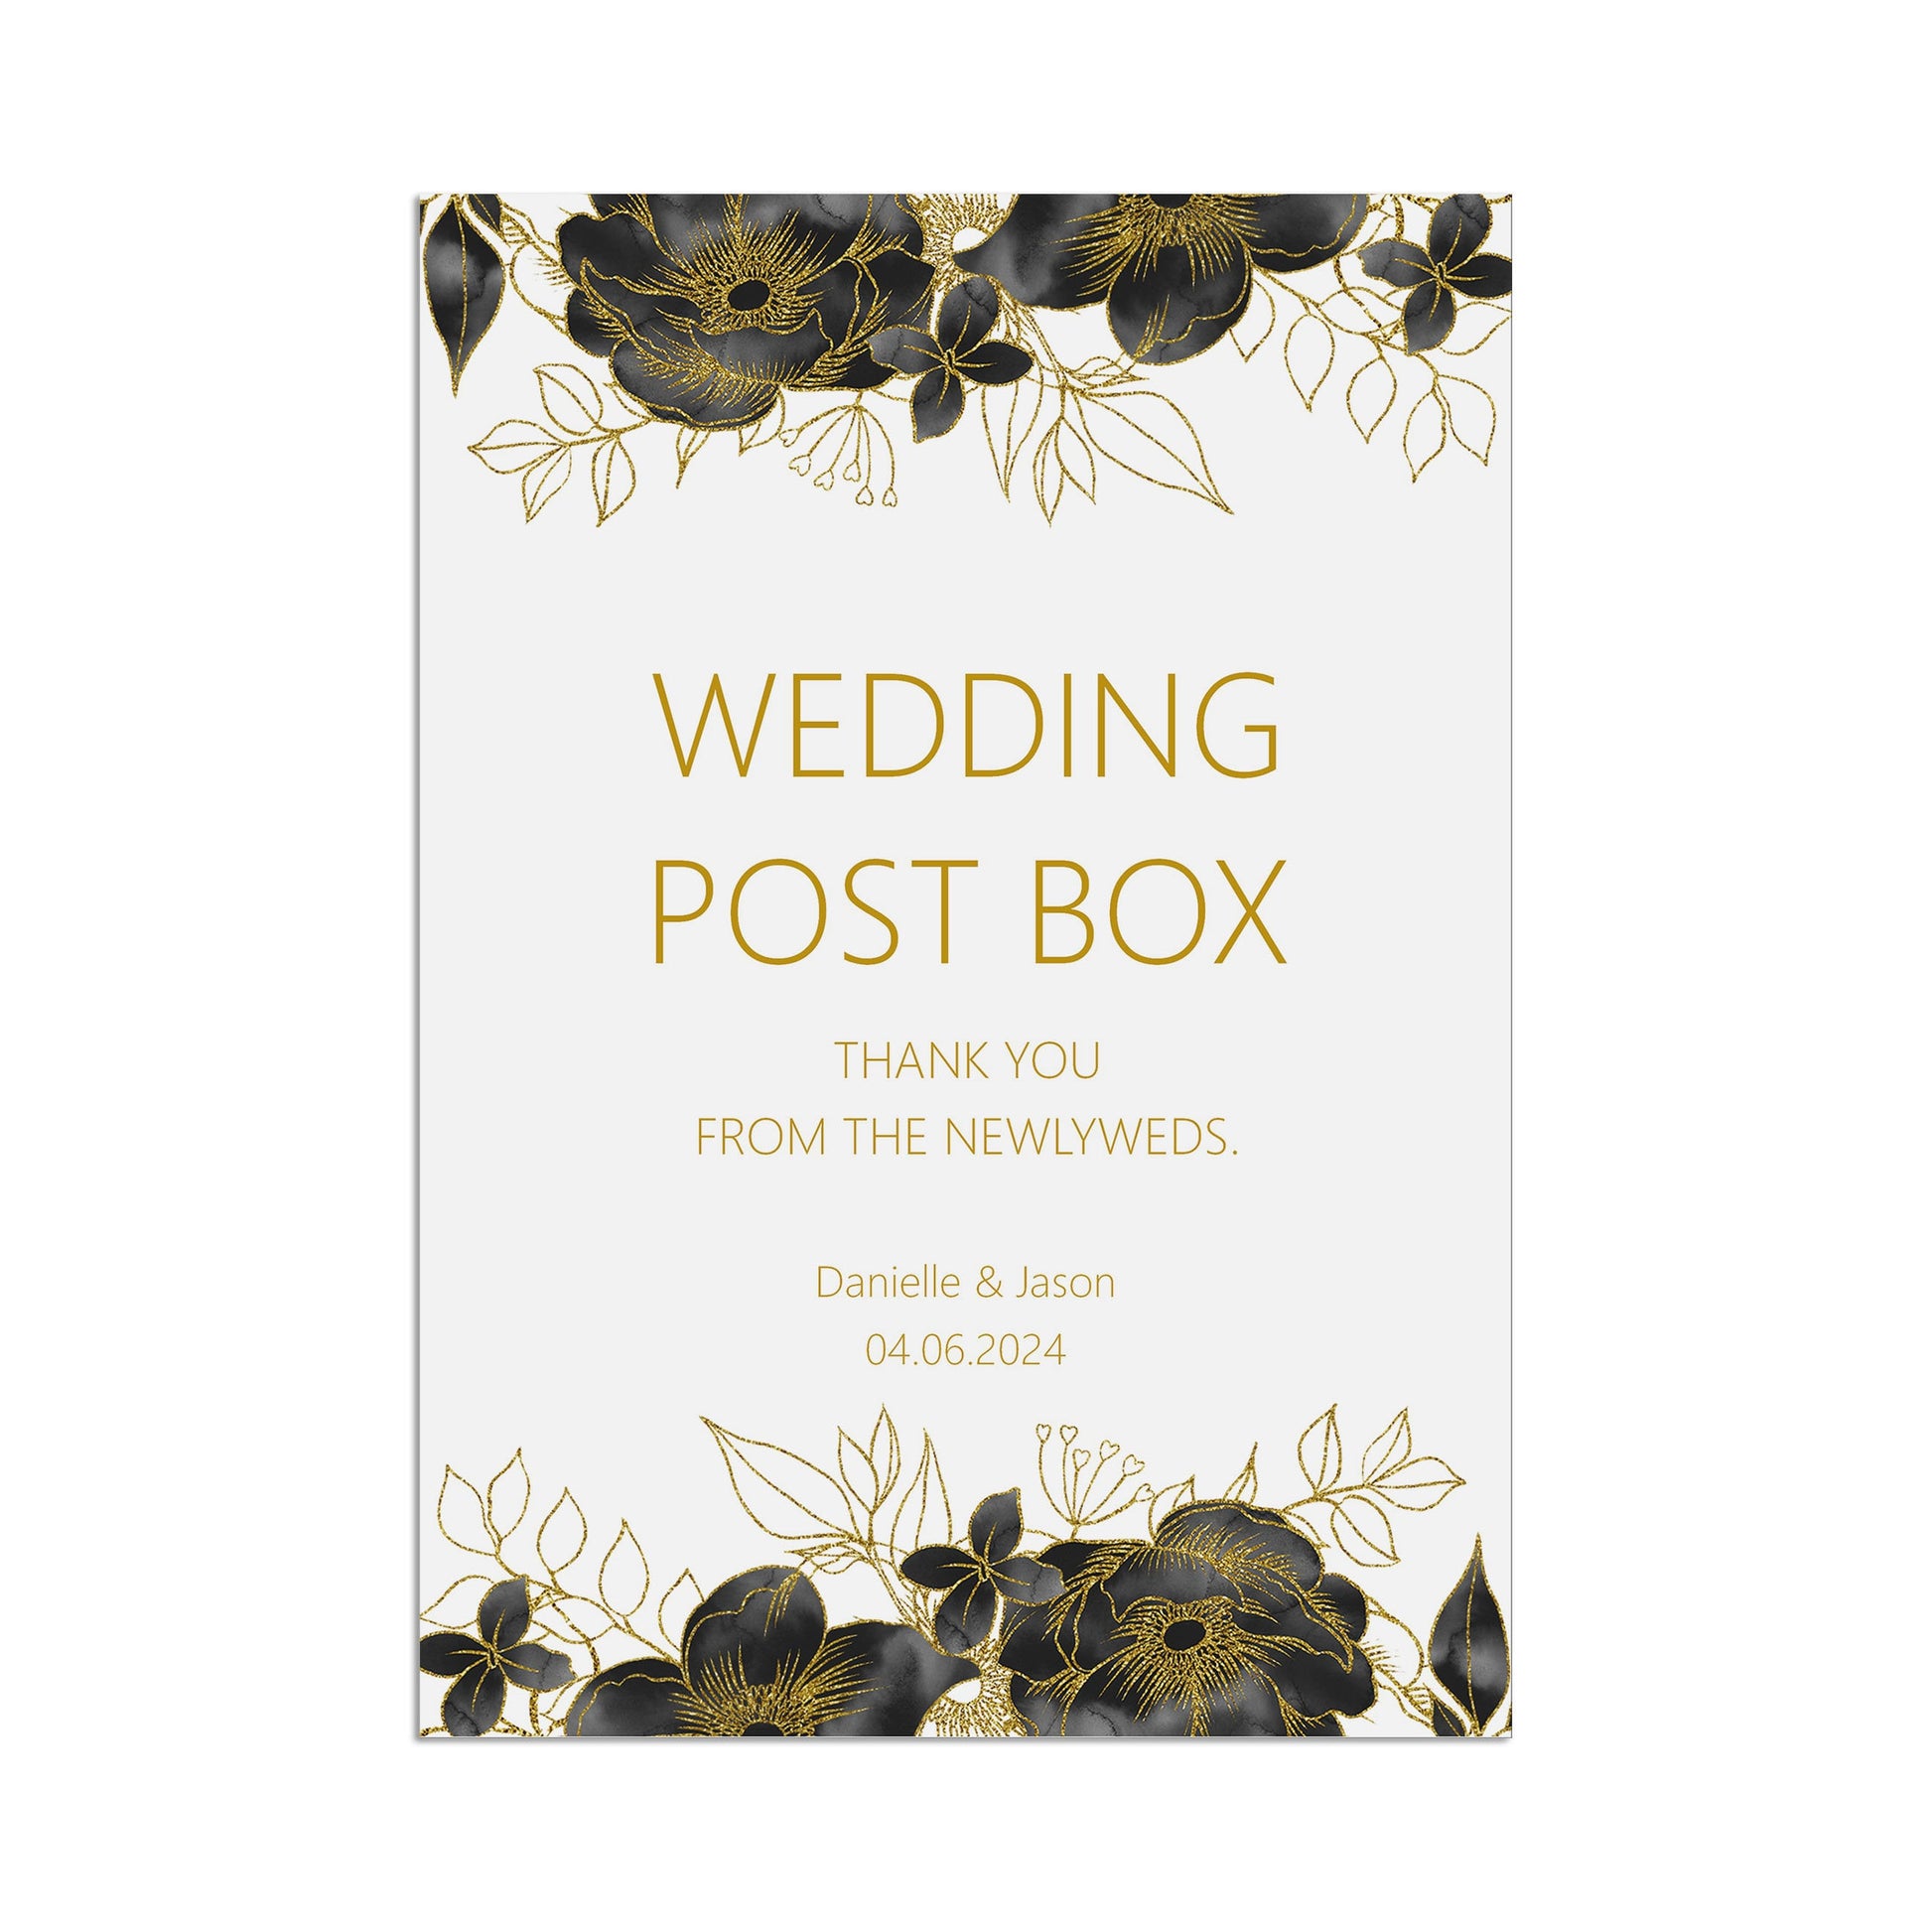 Black & Gold Wedding Post Box Sign - 3 Sizes Available